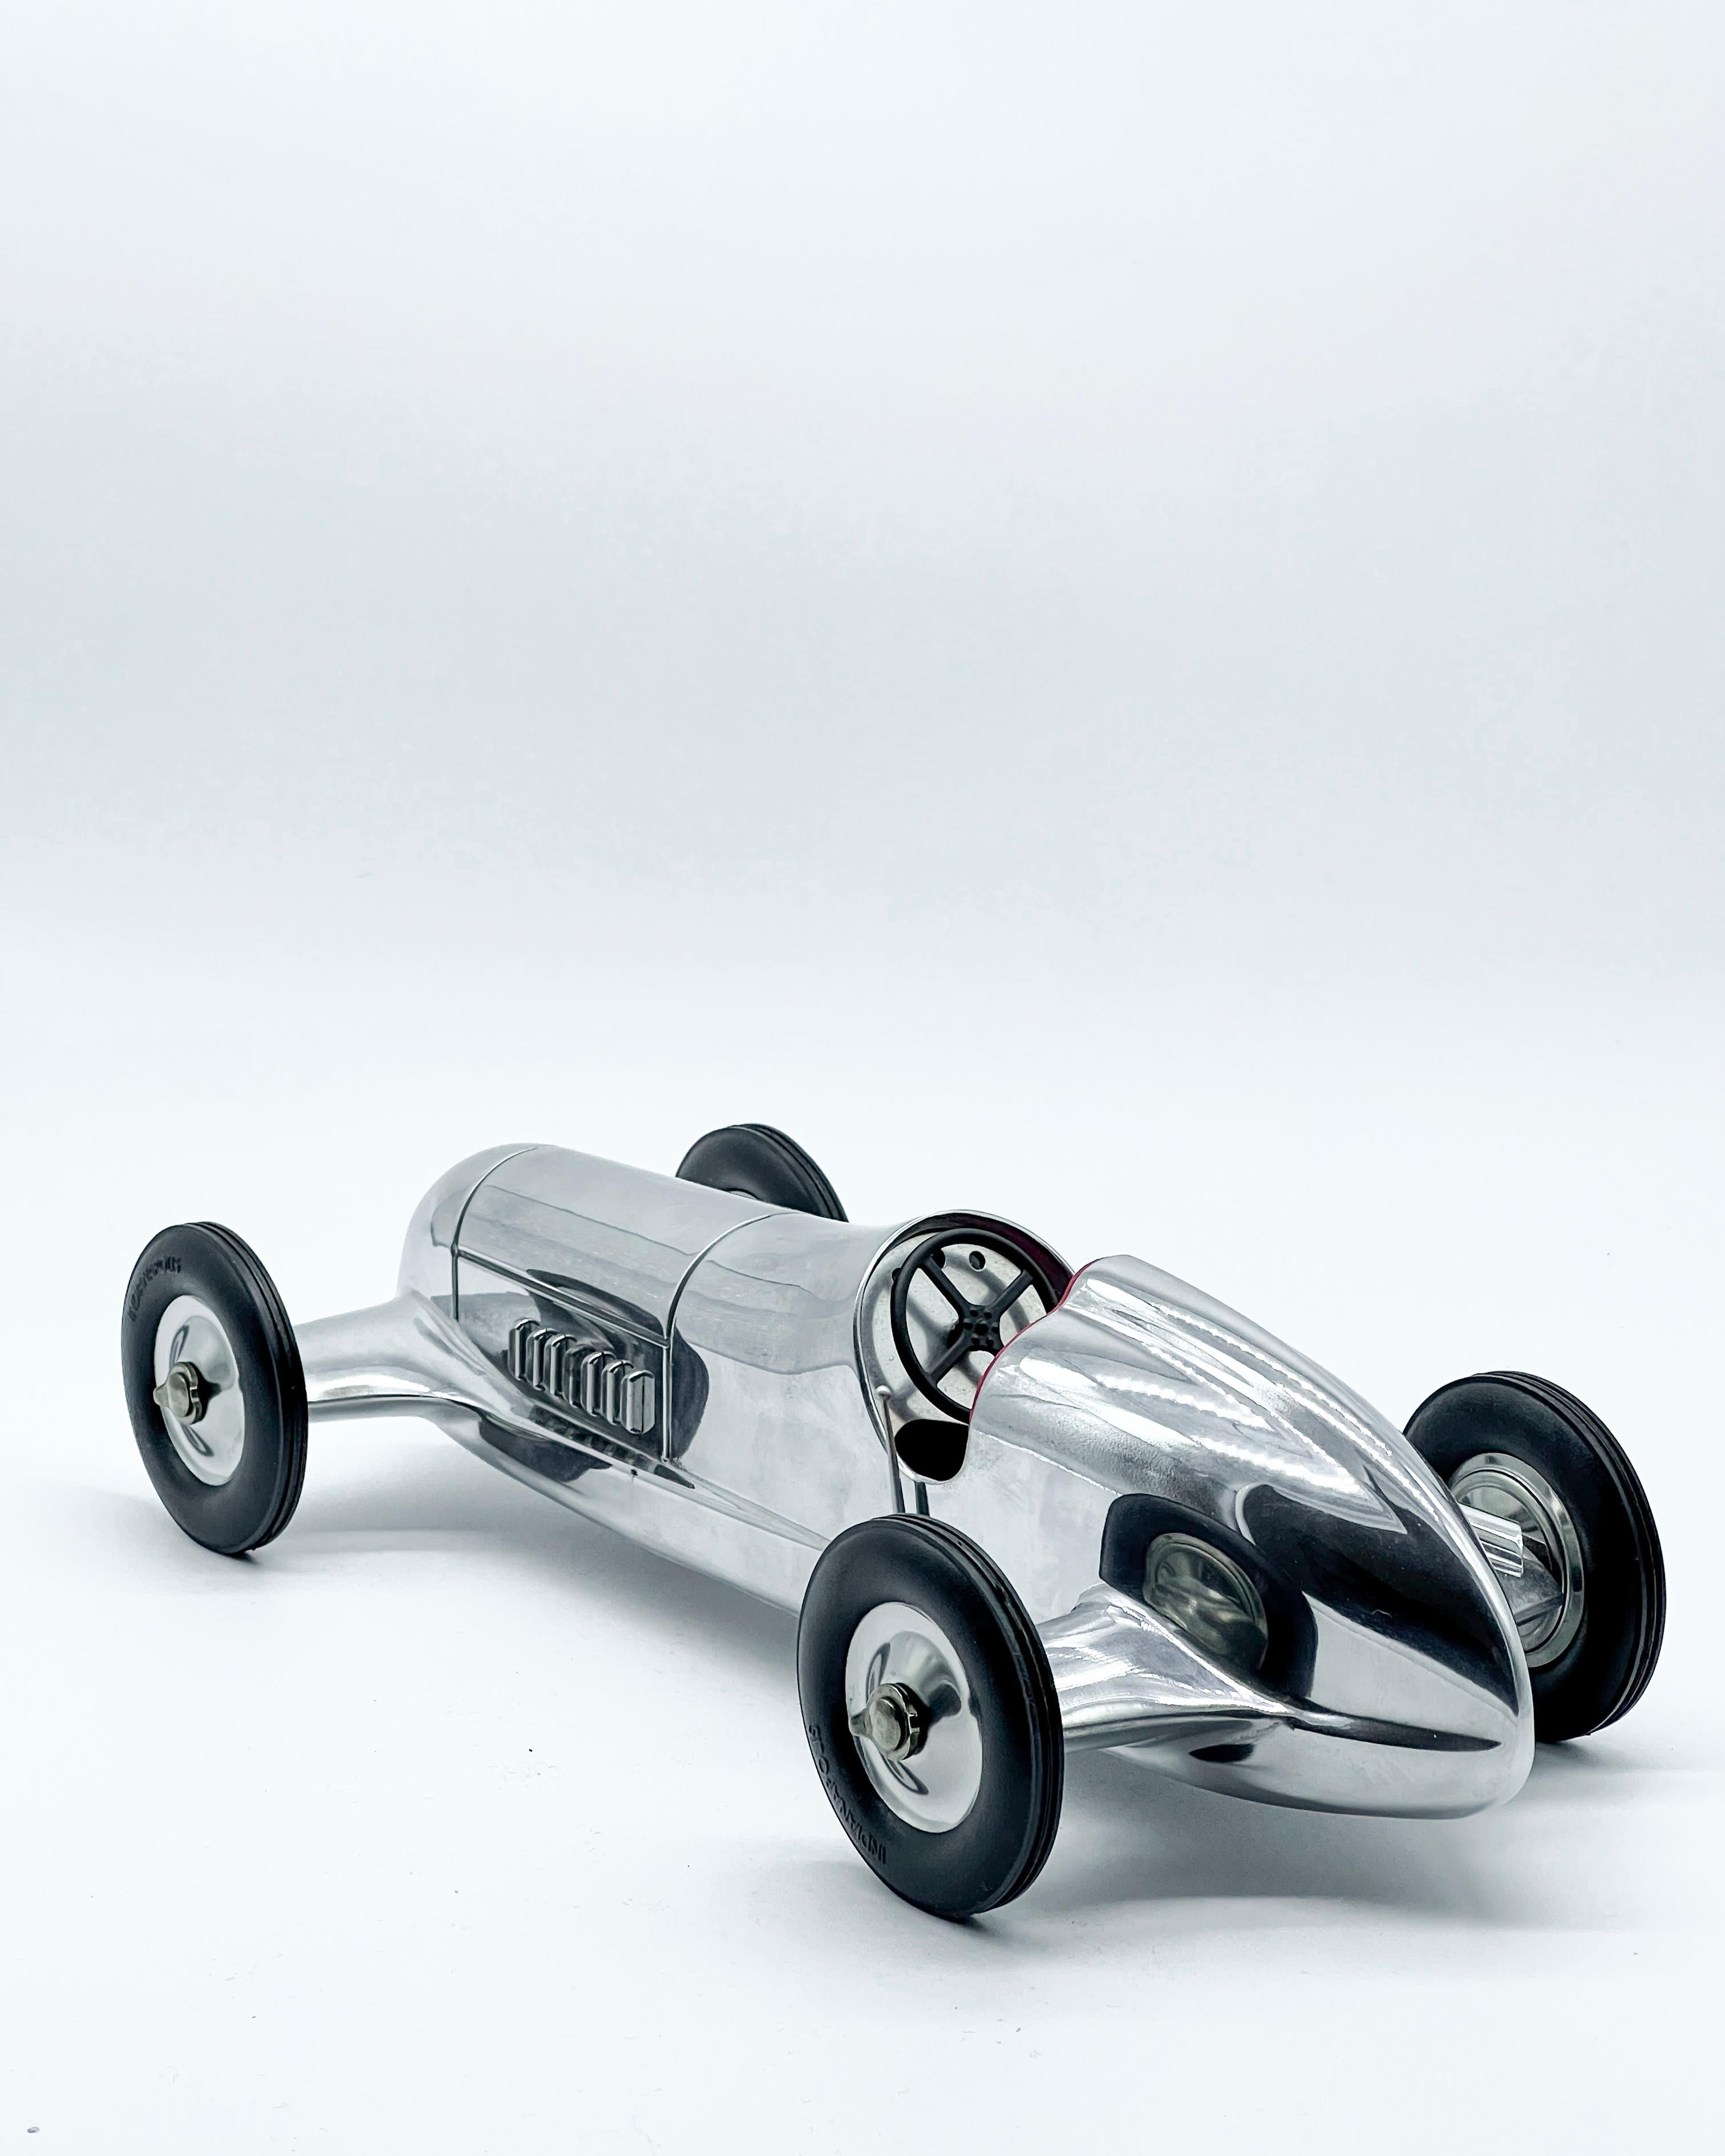 Stunning contemporary reproduction of a vintage racing car from the 1930s. The streamlined body, exhaust pipes, wheels and dashboard are all faithfully reproduced and highly detailed.

With a length of thirty centimeters, the model is a stunning